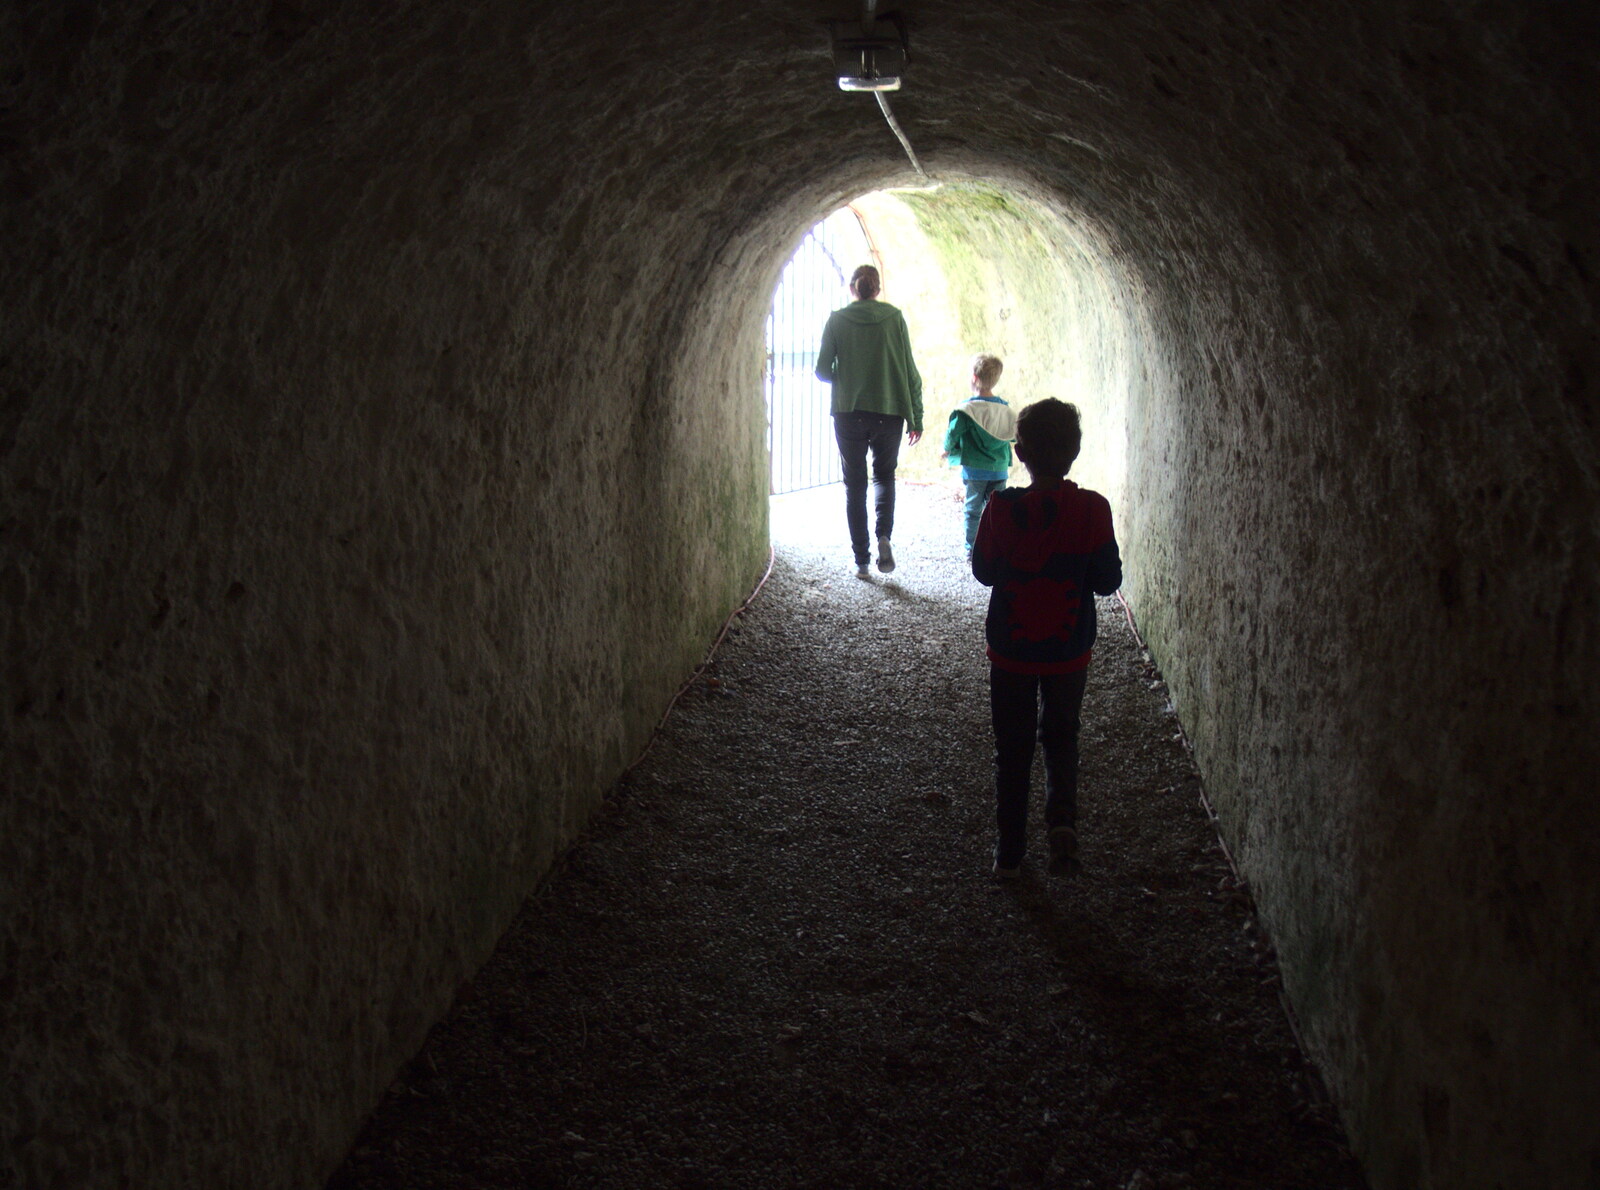 Roaming in a servants' tunnel from From Achill to Strokestown, Mayo and Roscommon, Ireland - 10th August 2017